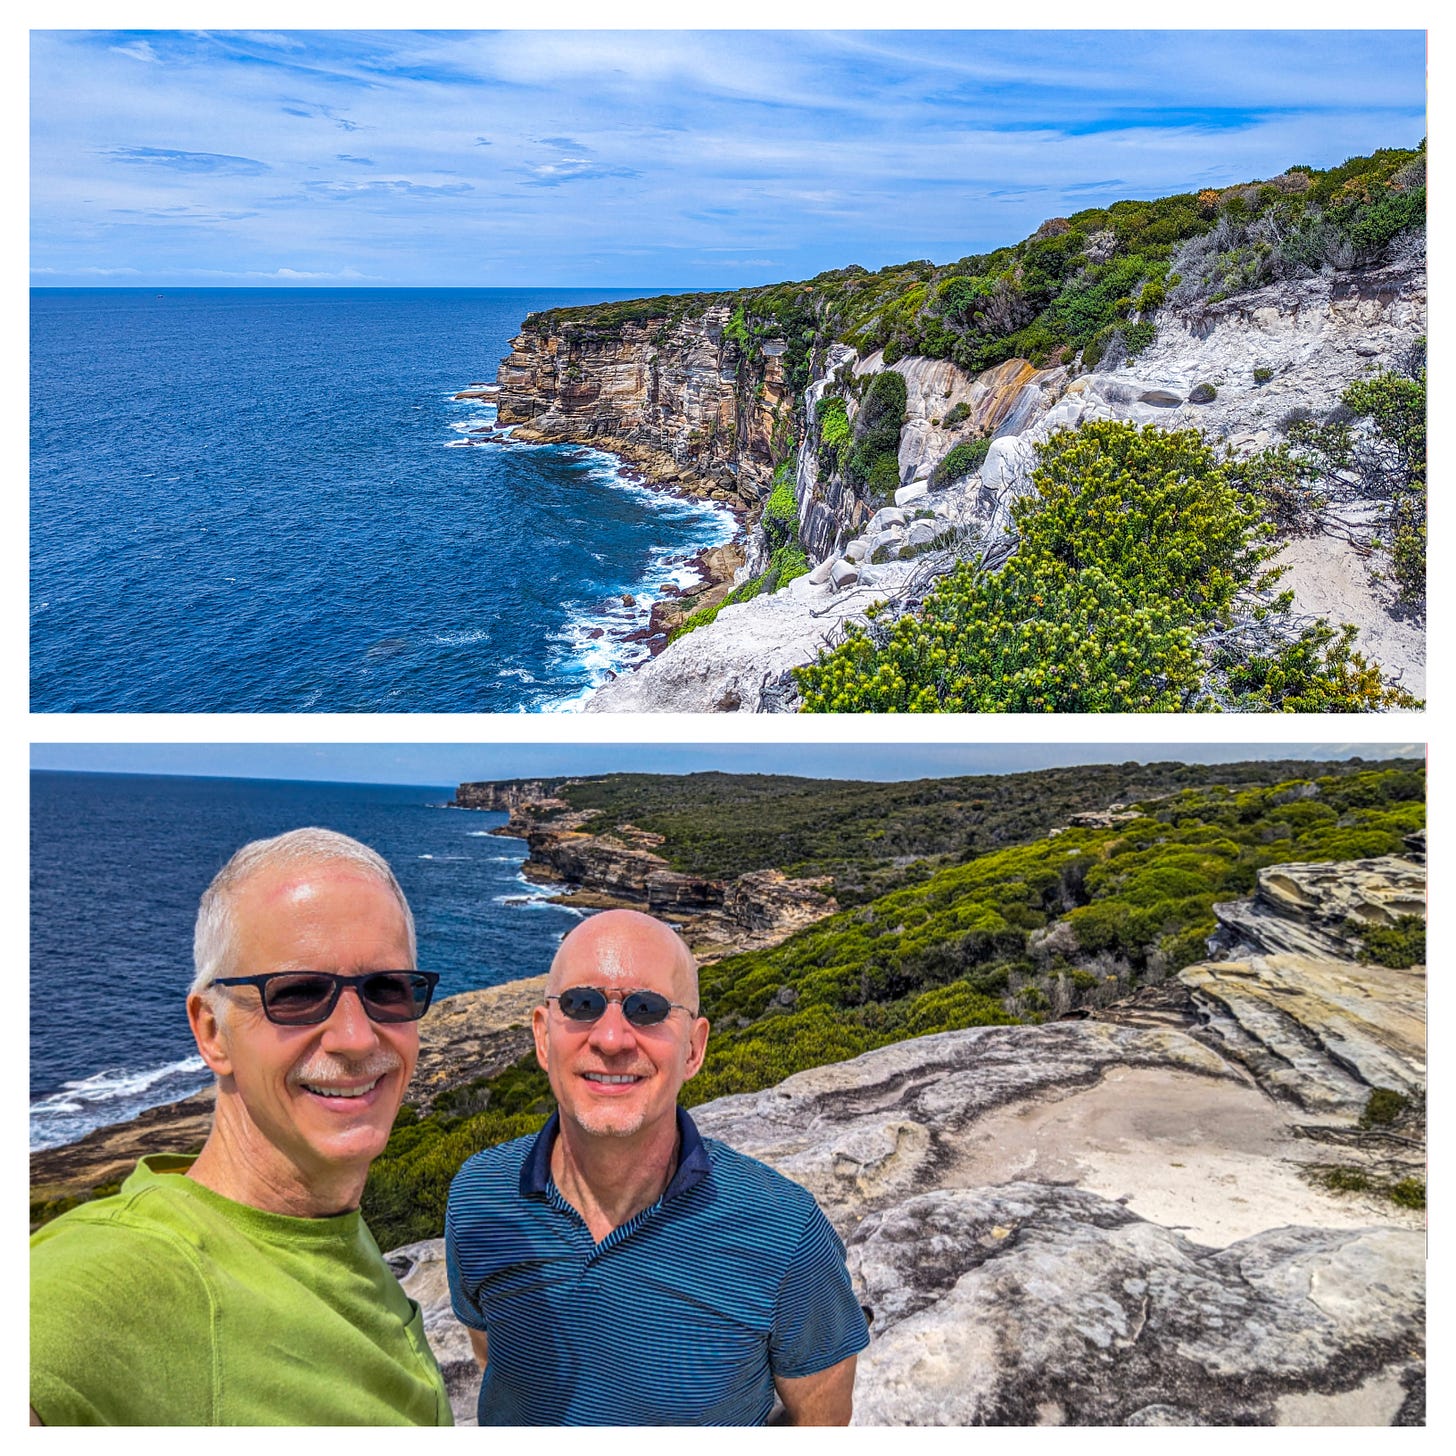 Two photos of the Royal National Park. Both show the coastline, the botoom one showing Brent and Michael standing on a bluff. 